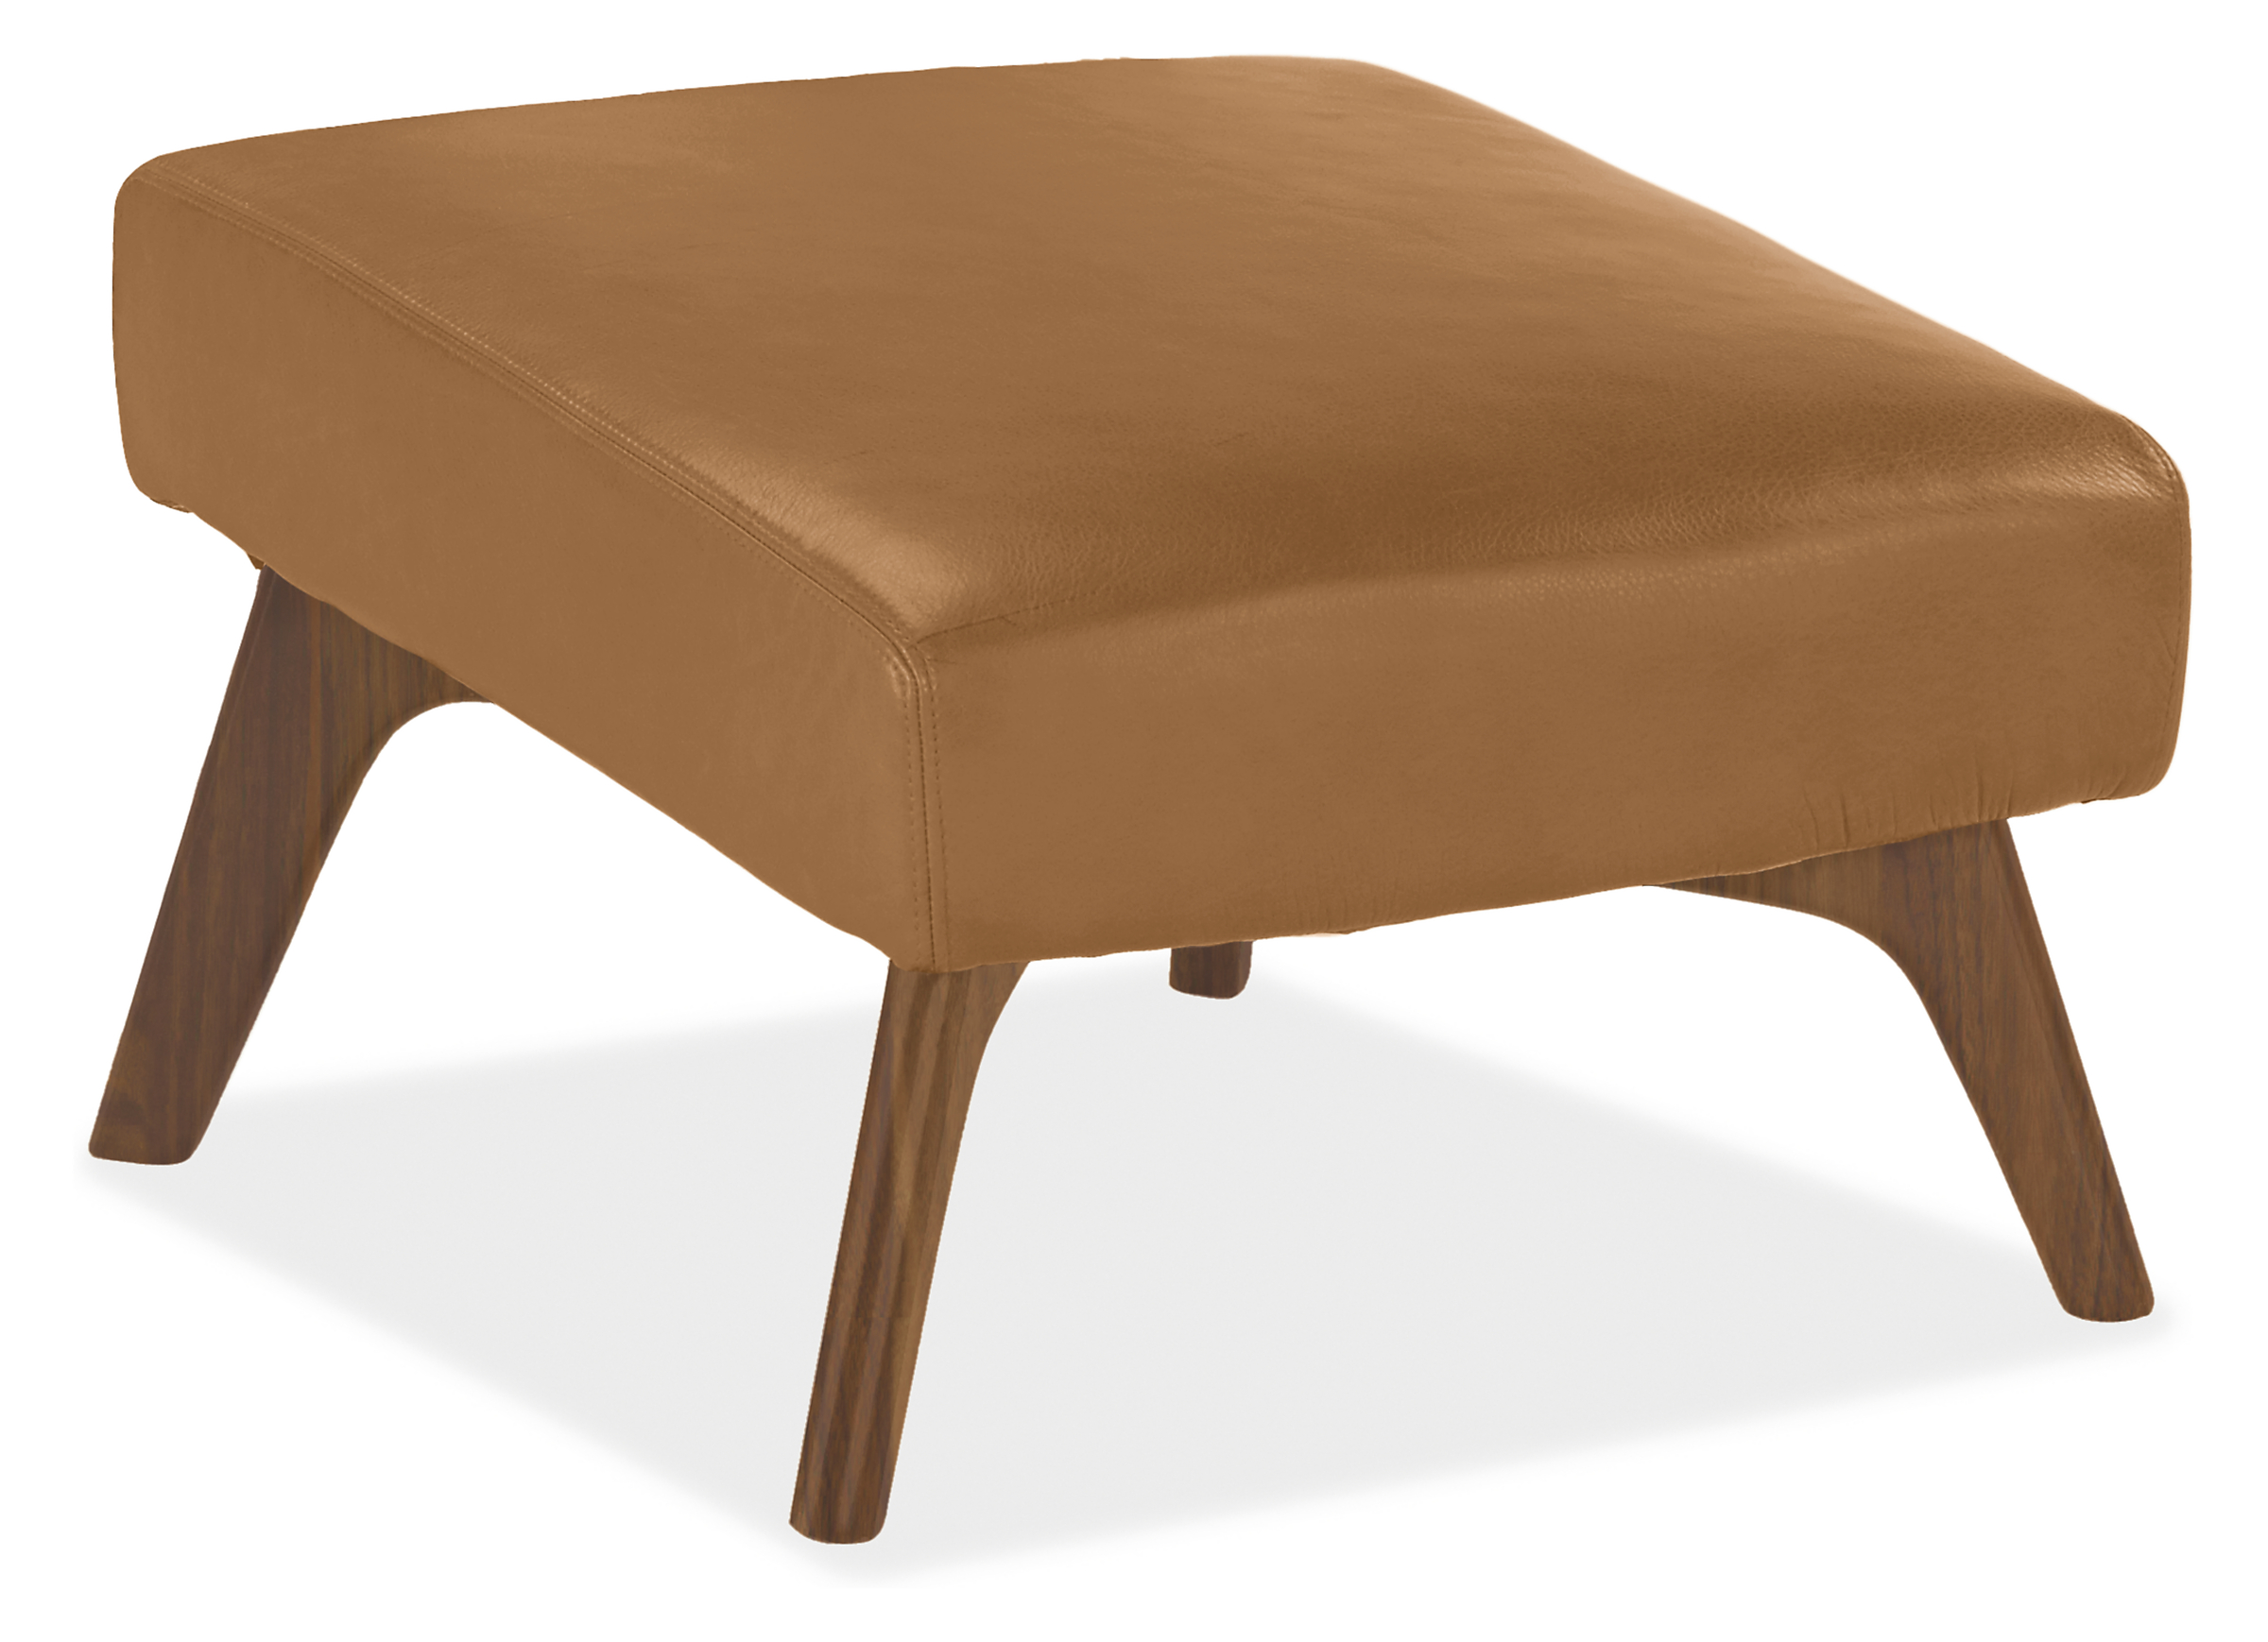 Boden 22w 22d 17h Ottoman in Laino Camel Leather with Walnut Base